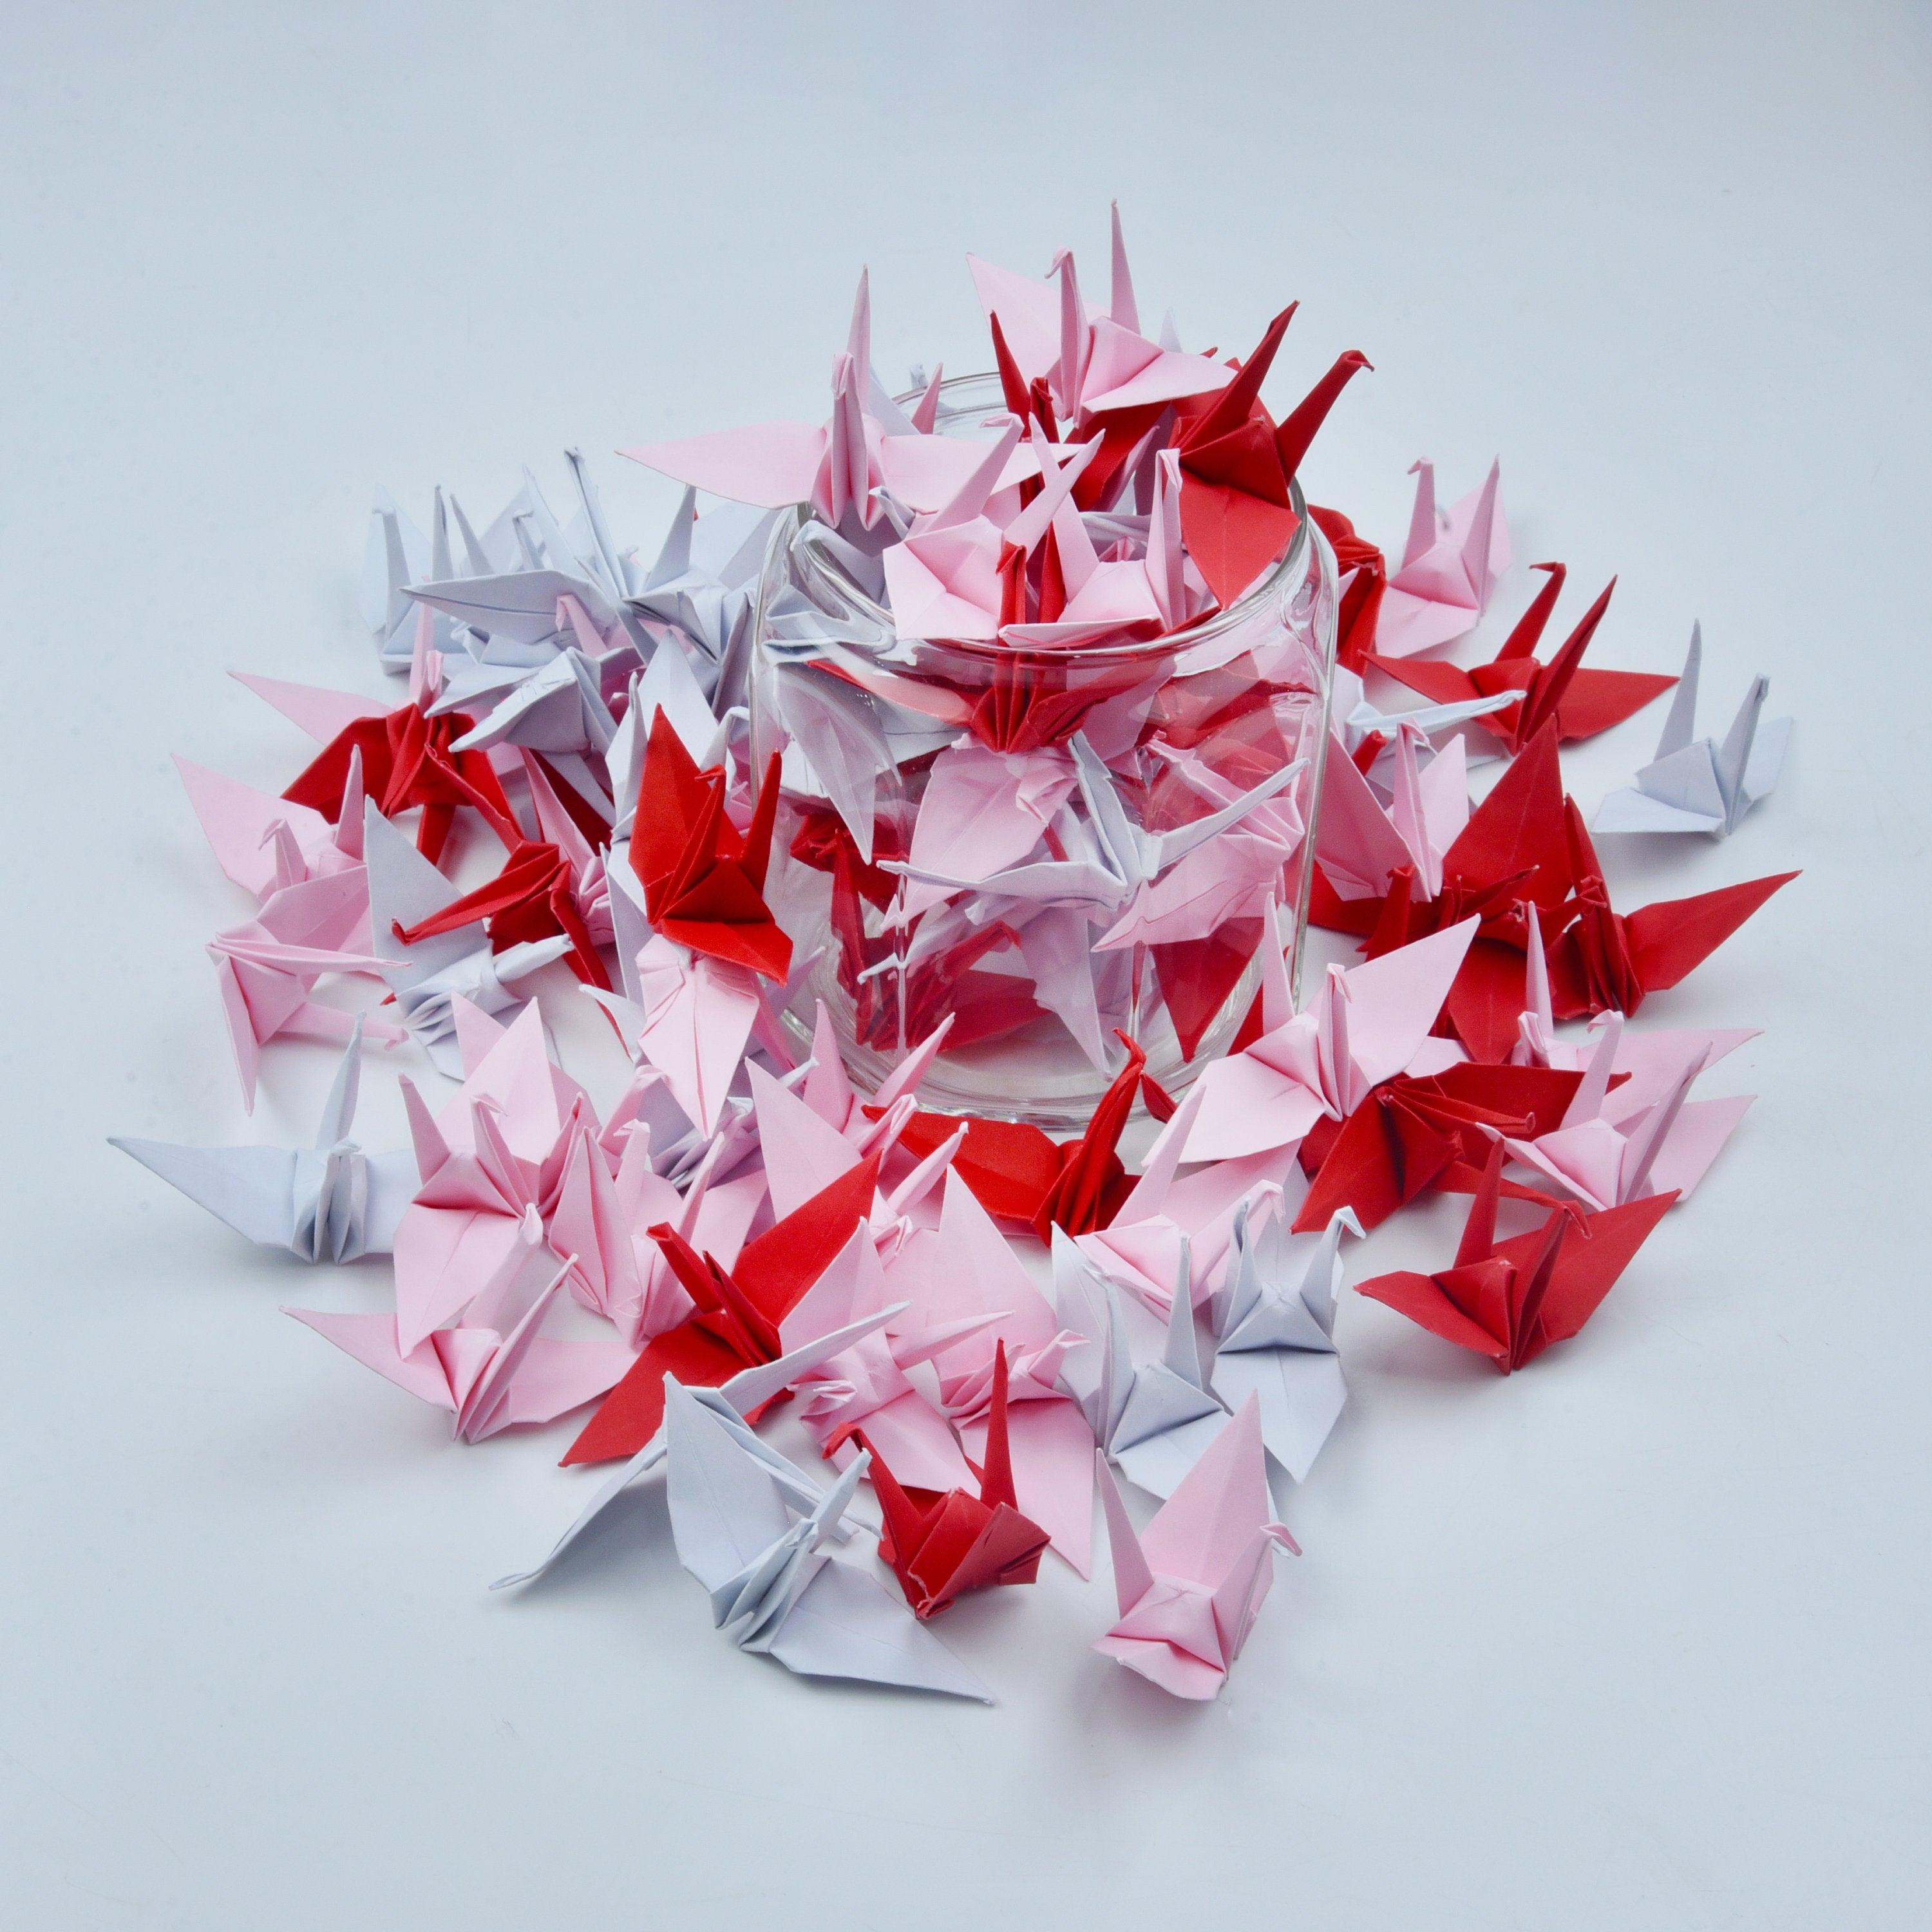 1000 Origami Paper Crane Pink Red Shade Made of 7.5 cm